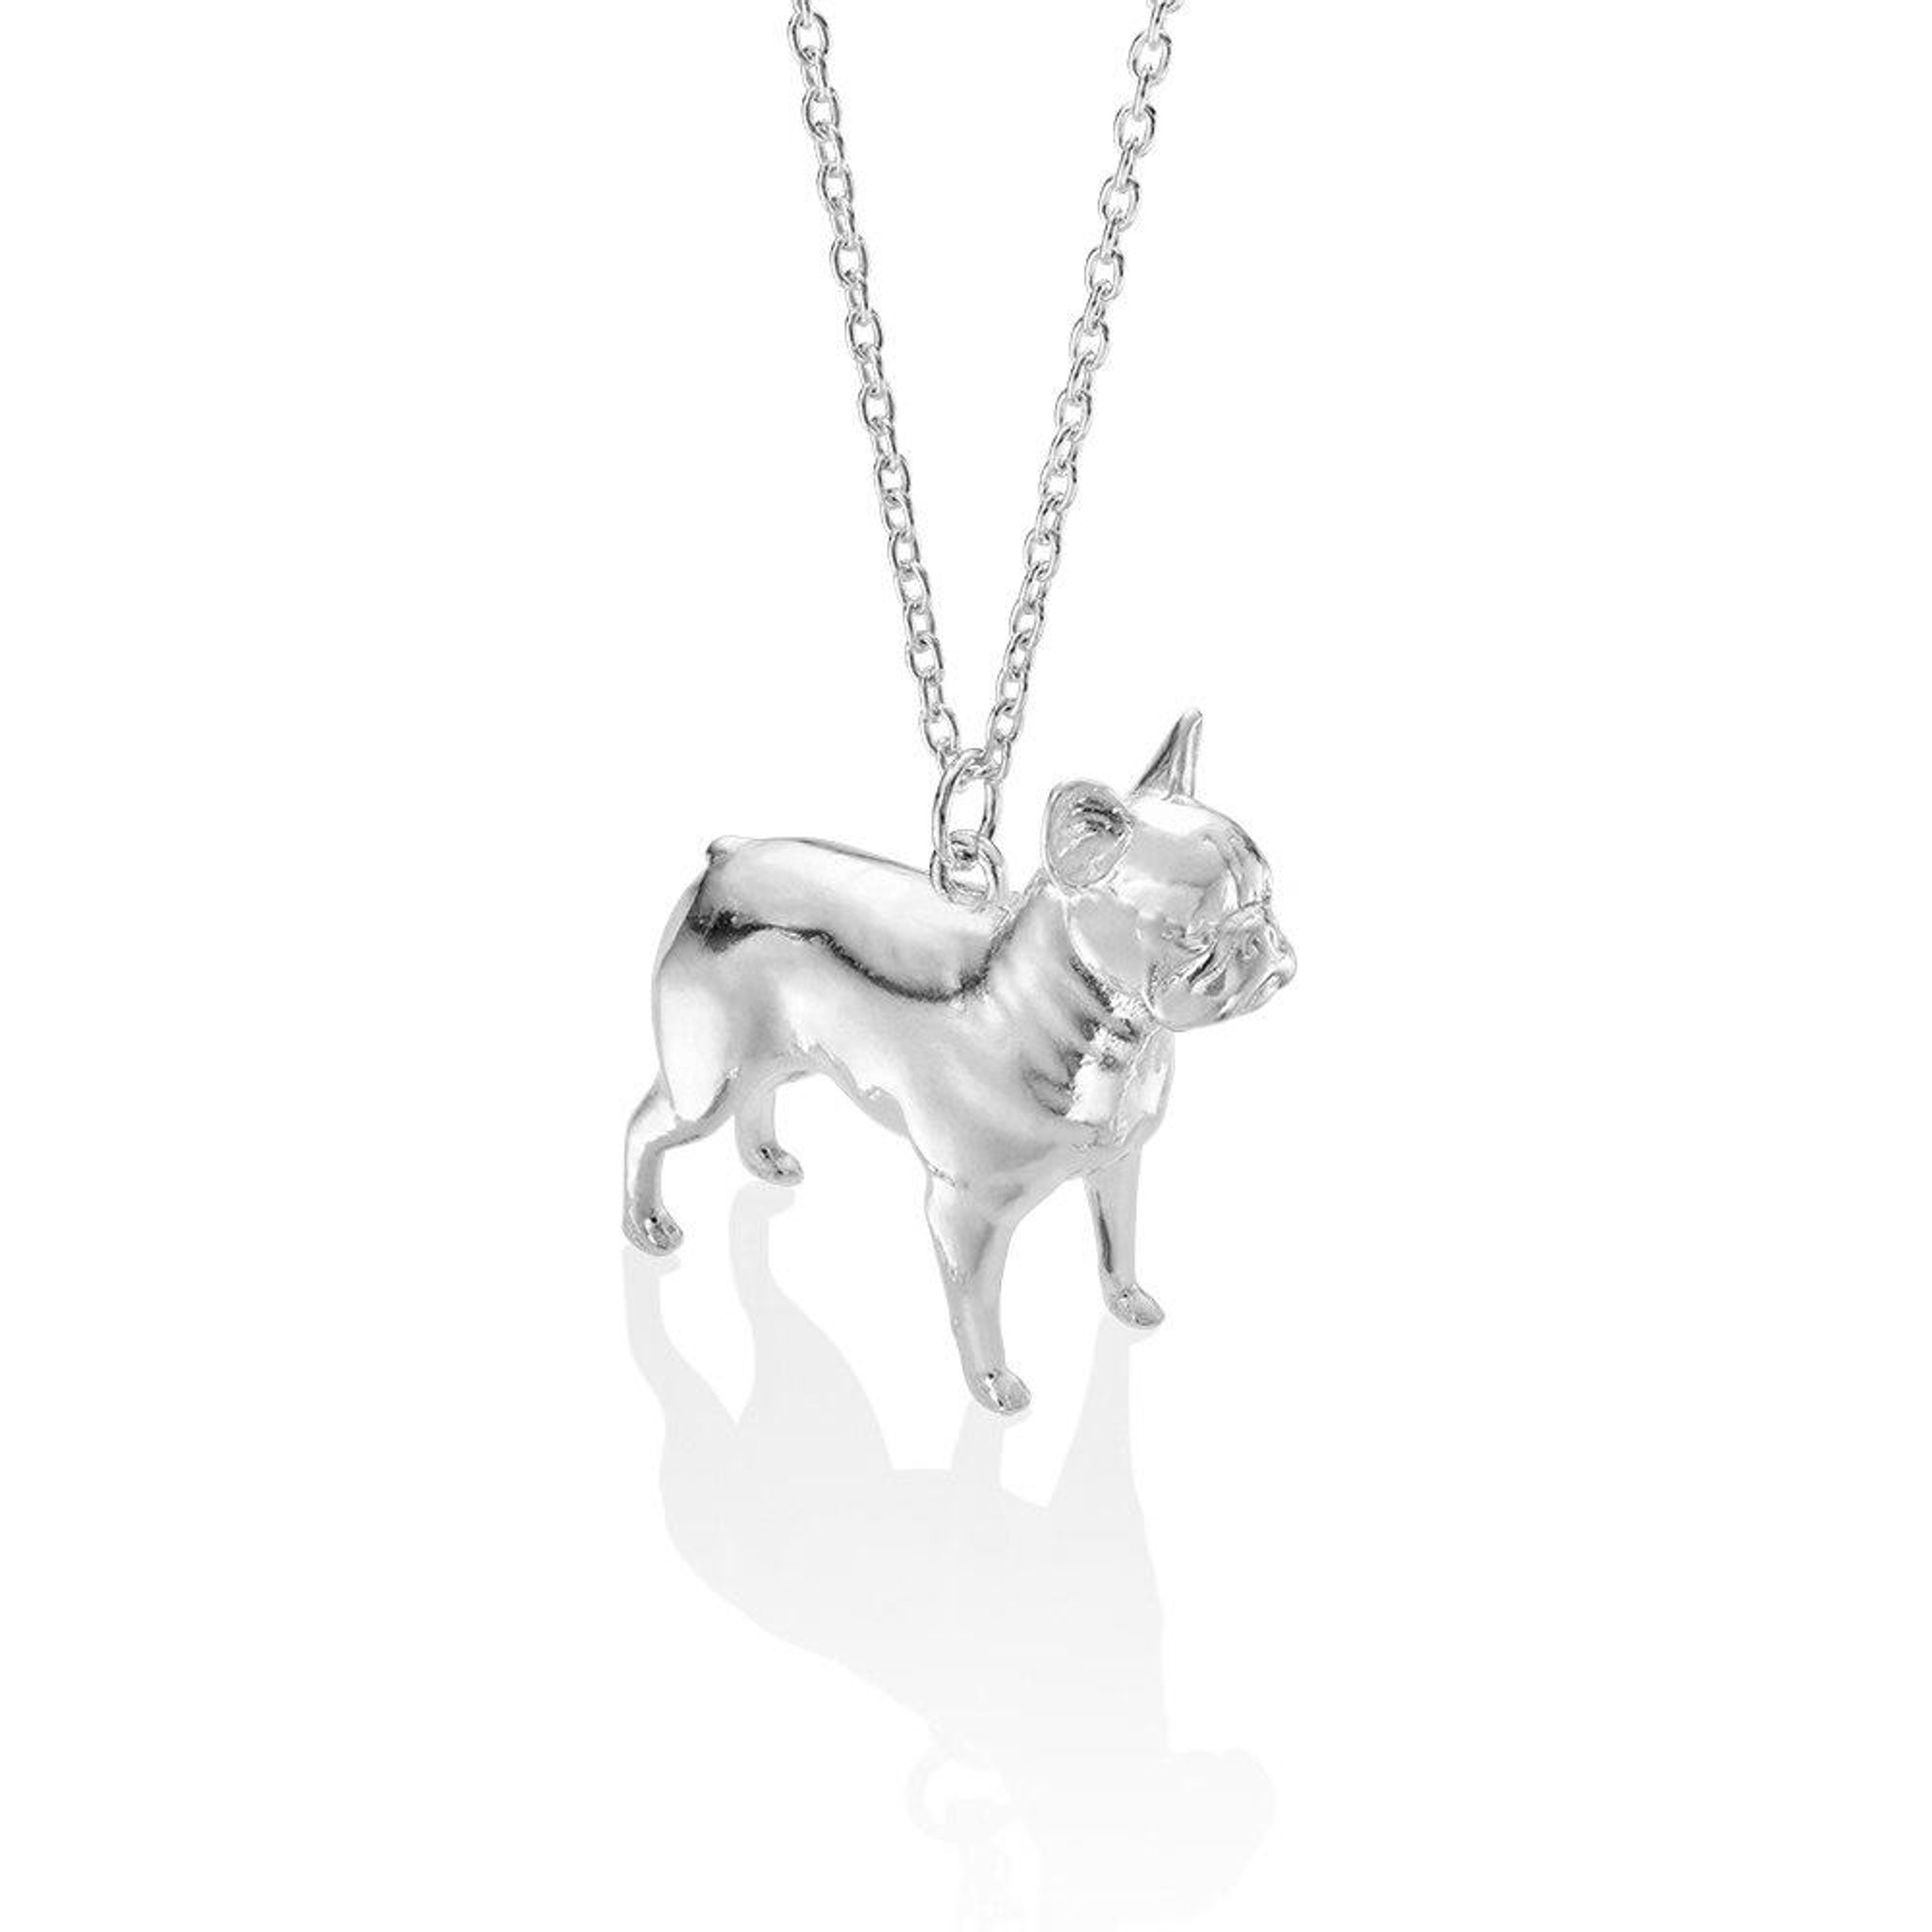 Unique Handmade FRENCH BULLDOG Pendant Necklace Animal Dog Jewelry nec –  The Frenchie Butt